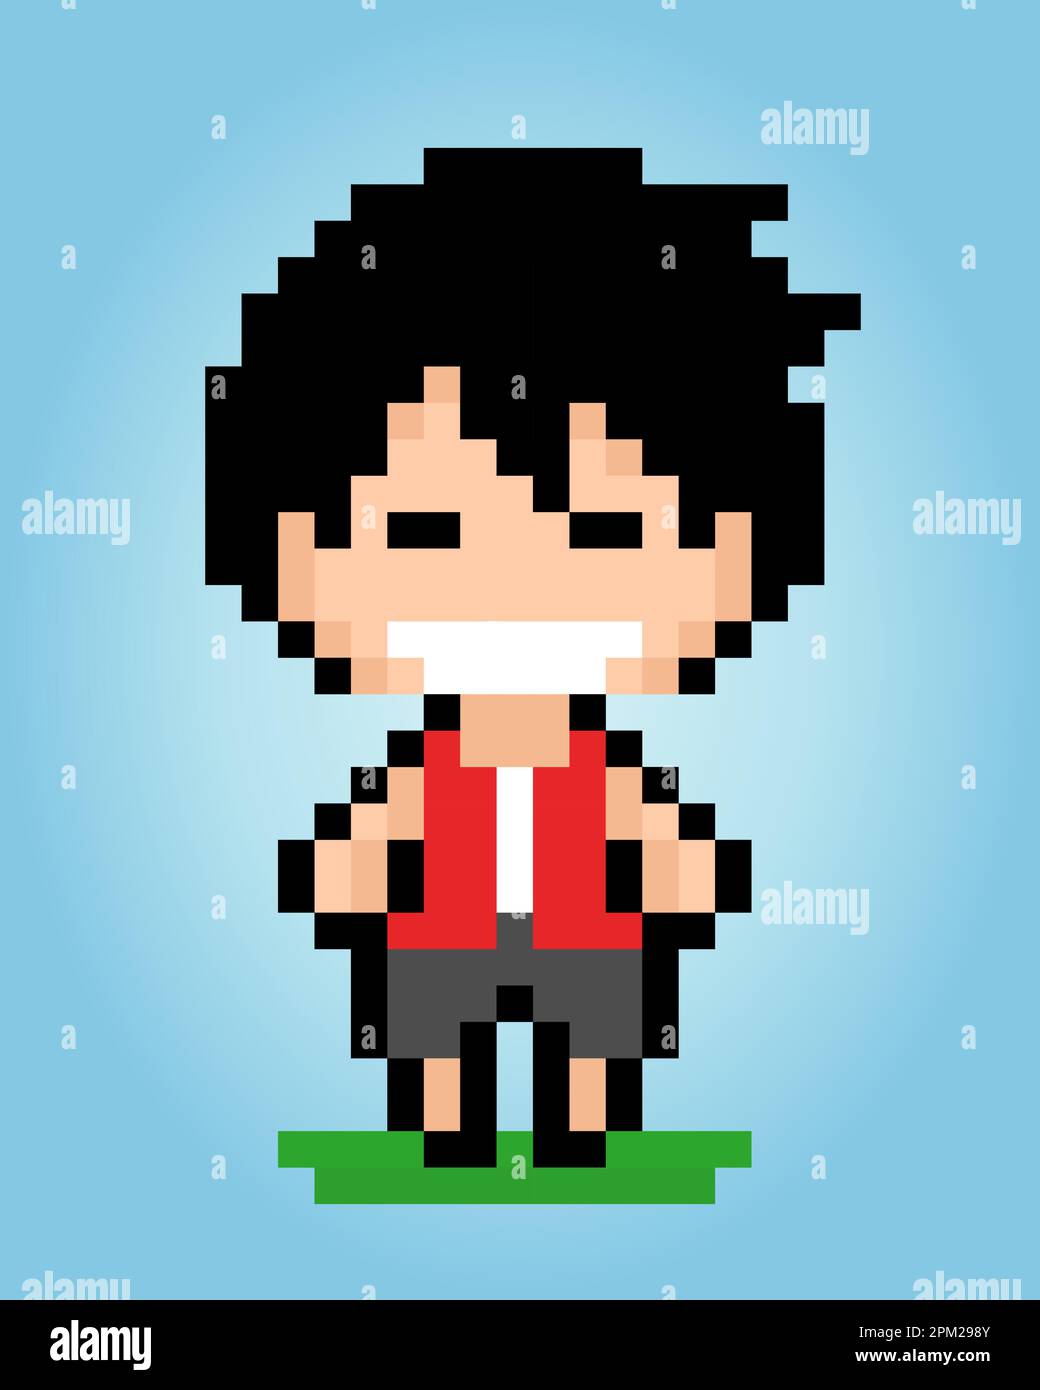 8 bit male character pixels. Human pixels in vector illustrations for game assets or cross stitch patterns. Stock Vector